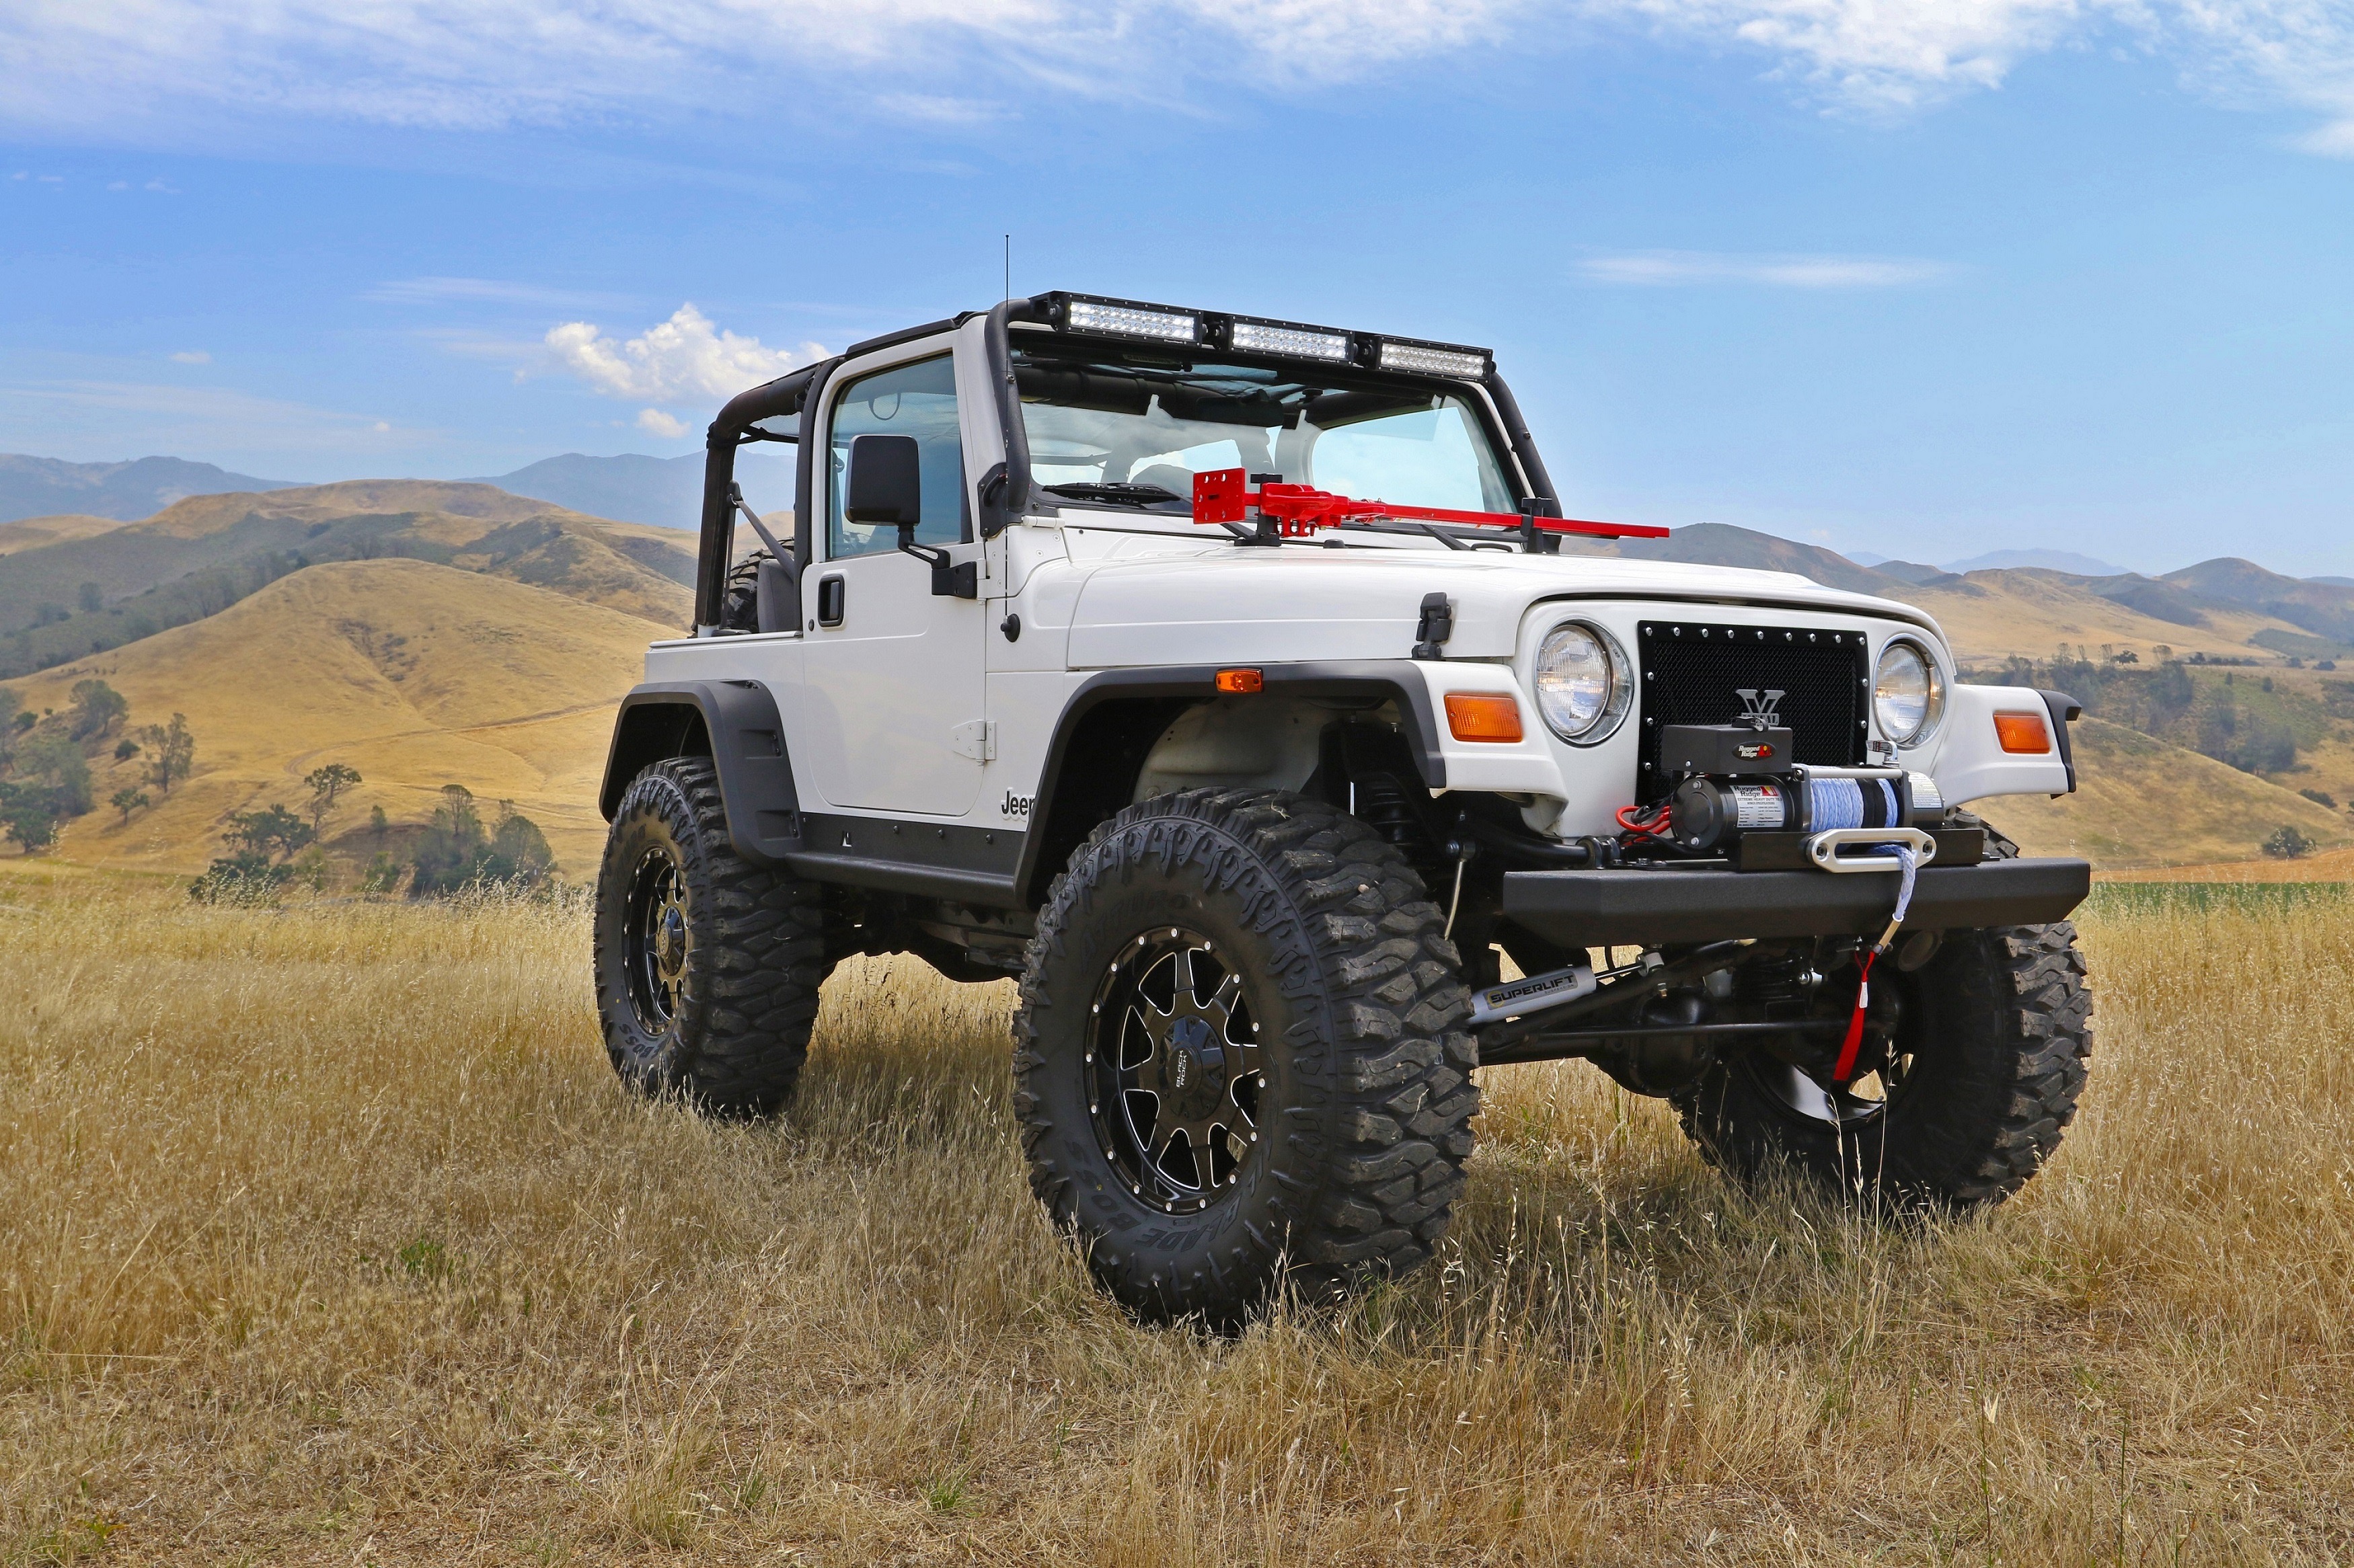 Jeep, SEMA offers 5 student-customized Jeeps at auction, ClassicCars.com Journal